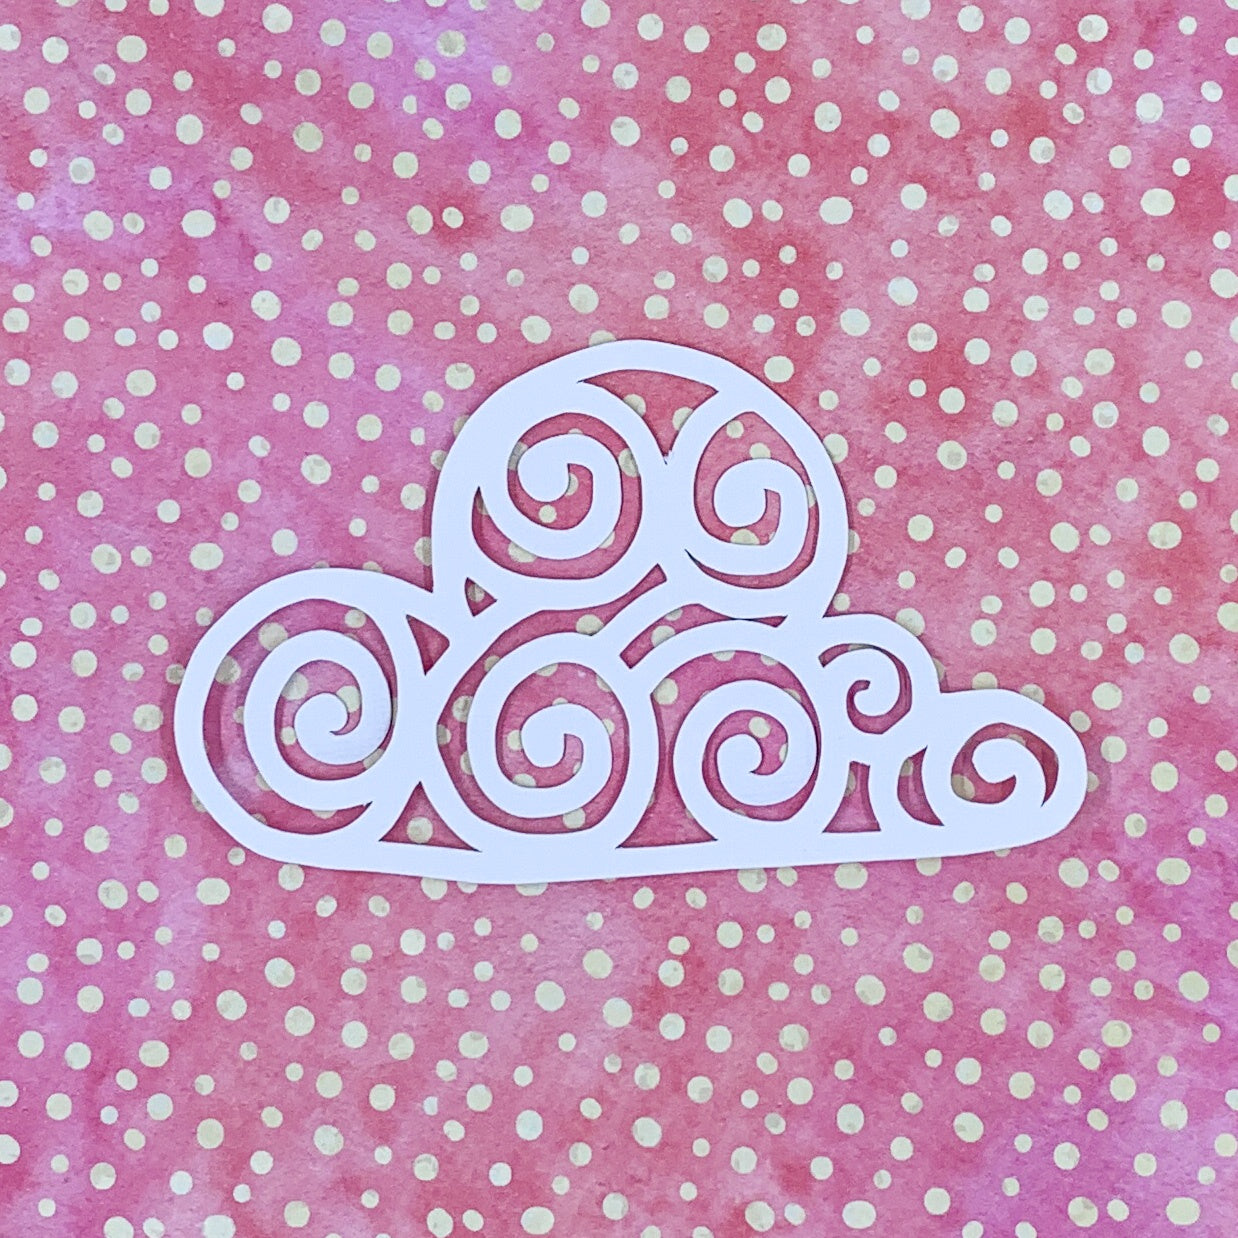 Tropicana - Curly Cloud (medium) 4.5"x2.75" White Linen Cardstock Picture-Cut - Designed by Alicia Redshaw